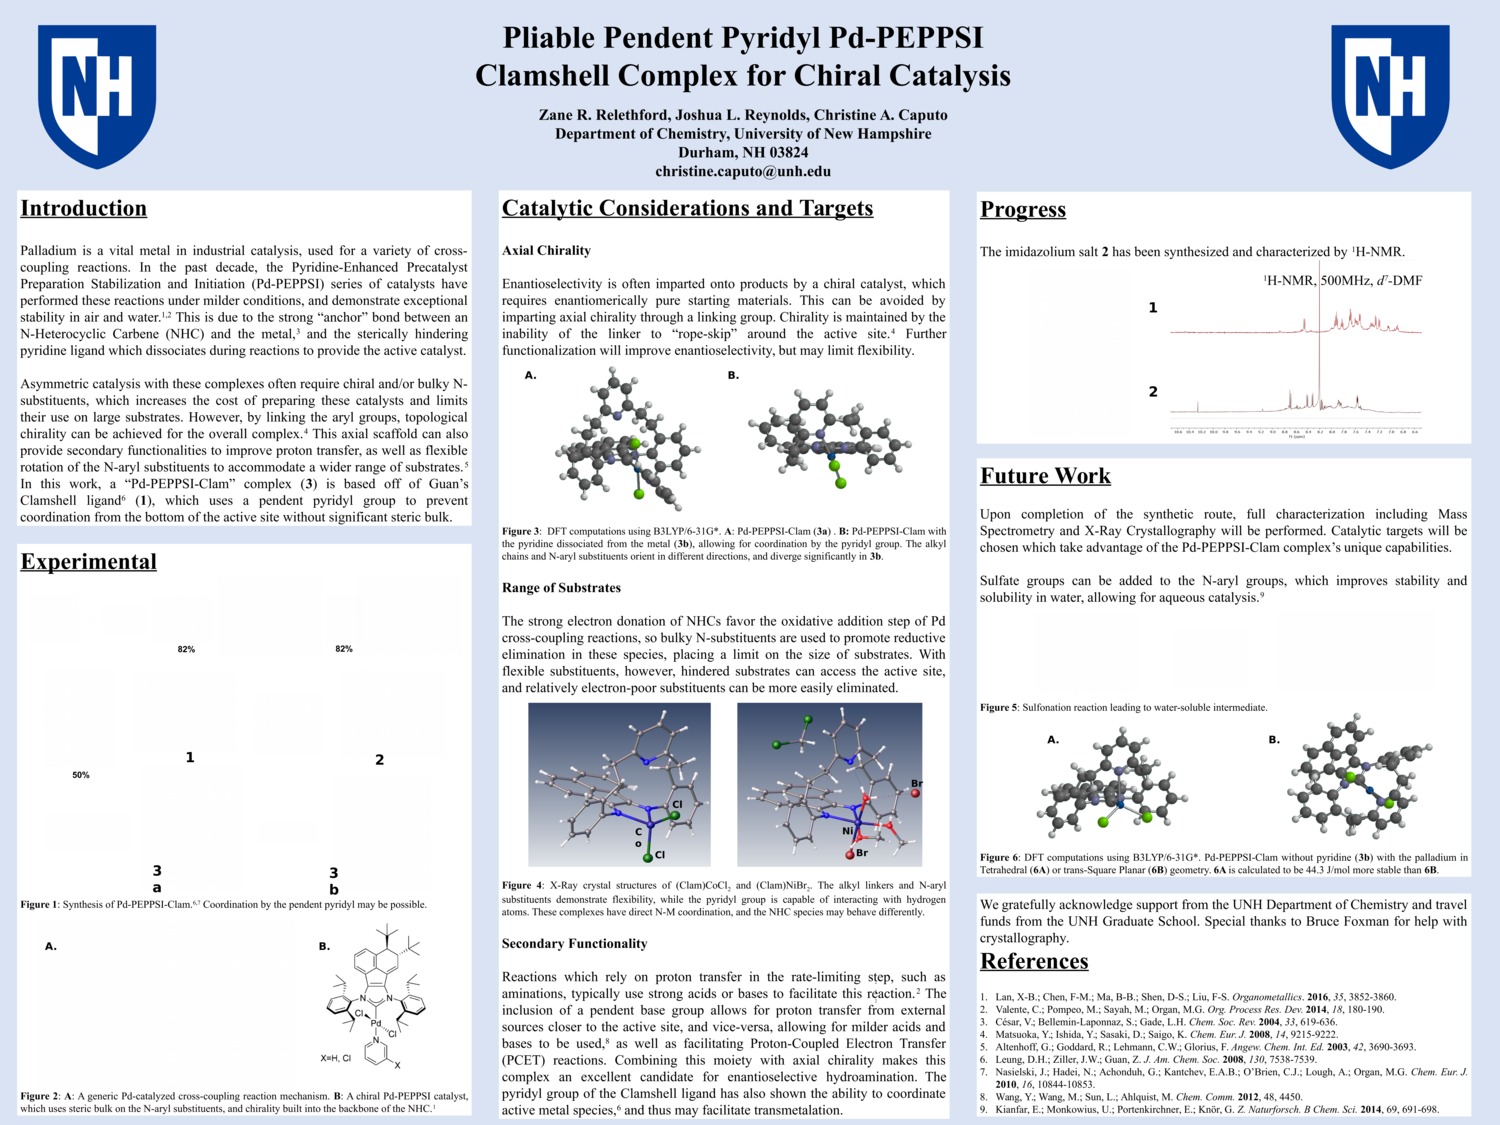 Pliable Pendent Pyridyl Pd-Peppsi Clamshell Complex For Chiral Catalysis by ZRelethford